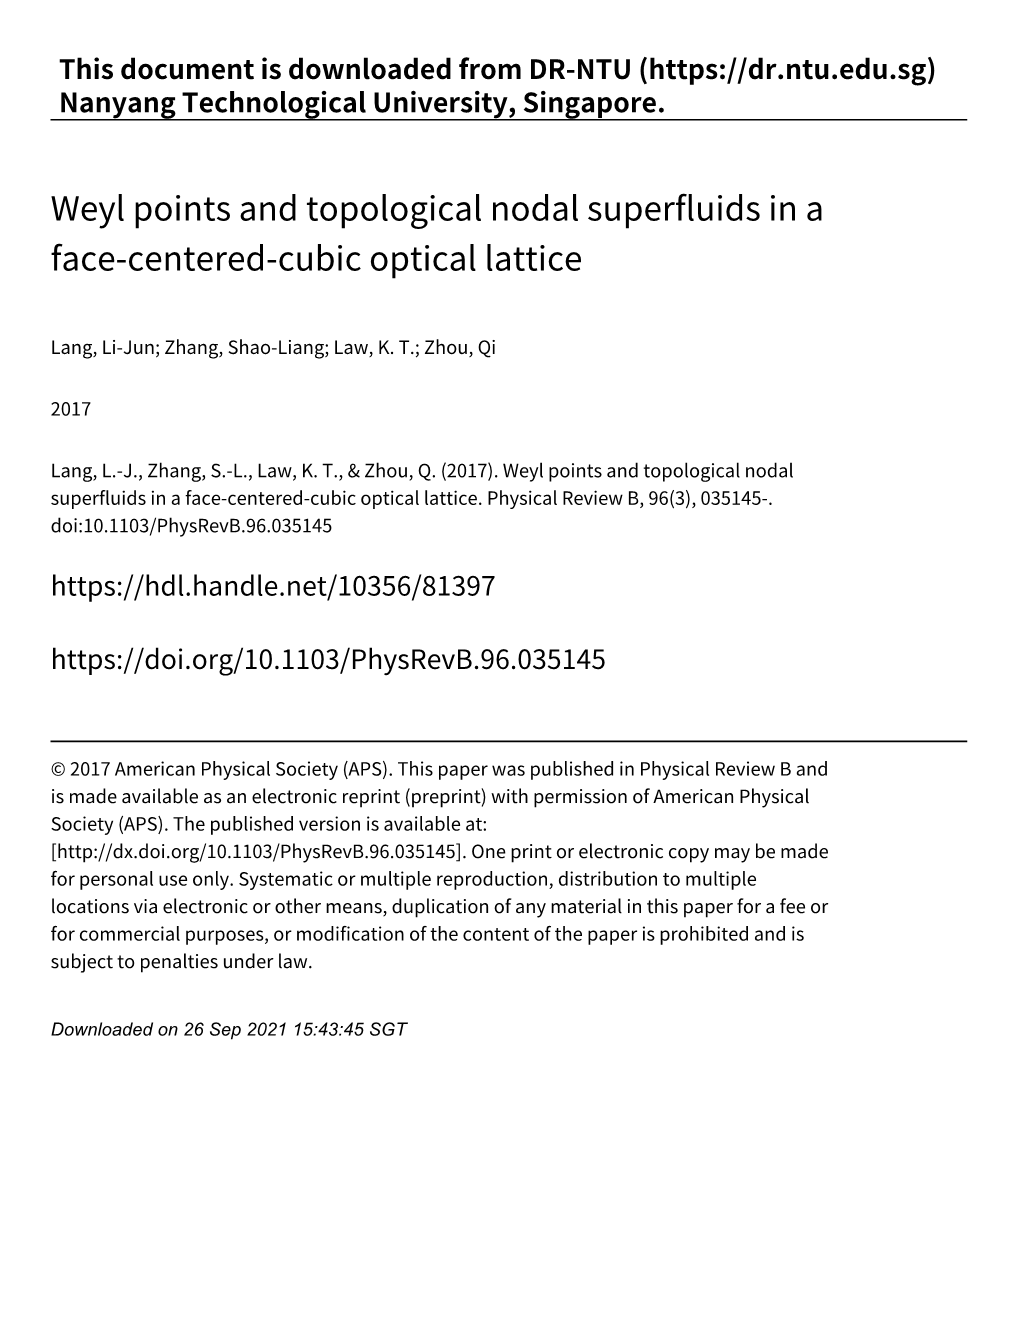 Weyl Points and Topological Nodal Superfluids in a Face‑Centered‑Cubic Optical Lattice